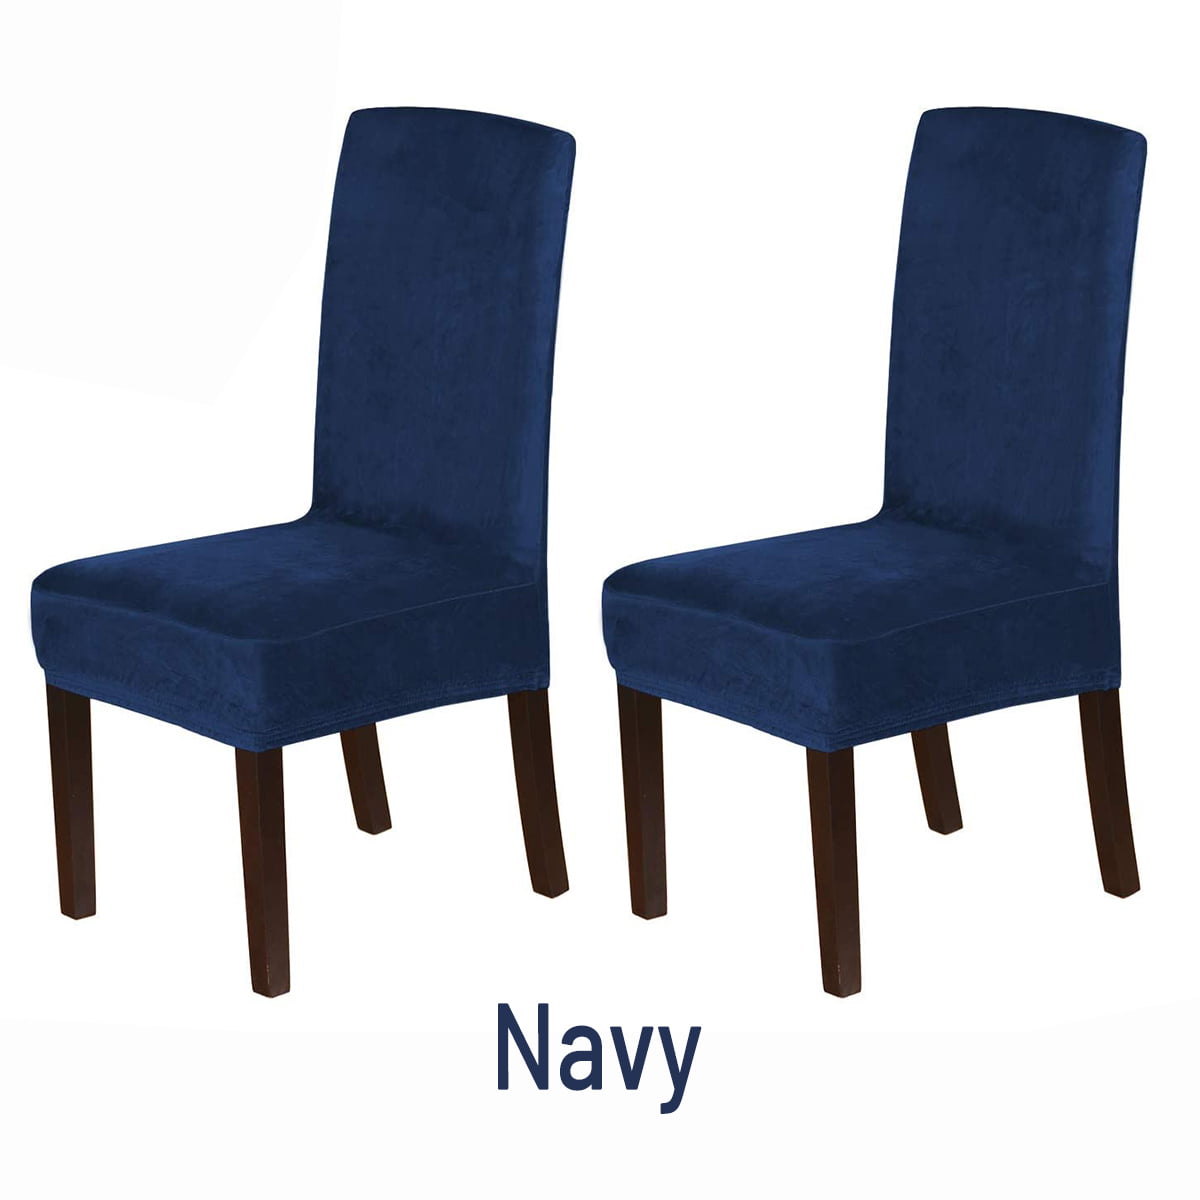 Details about   Covers chairs dining room universal size lycra stretchable washable durable show original title 